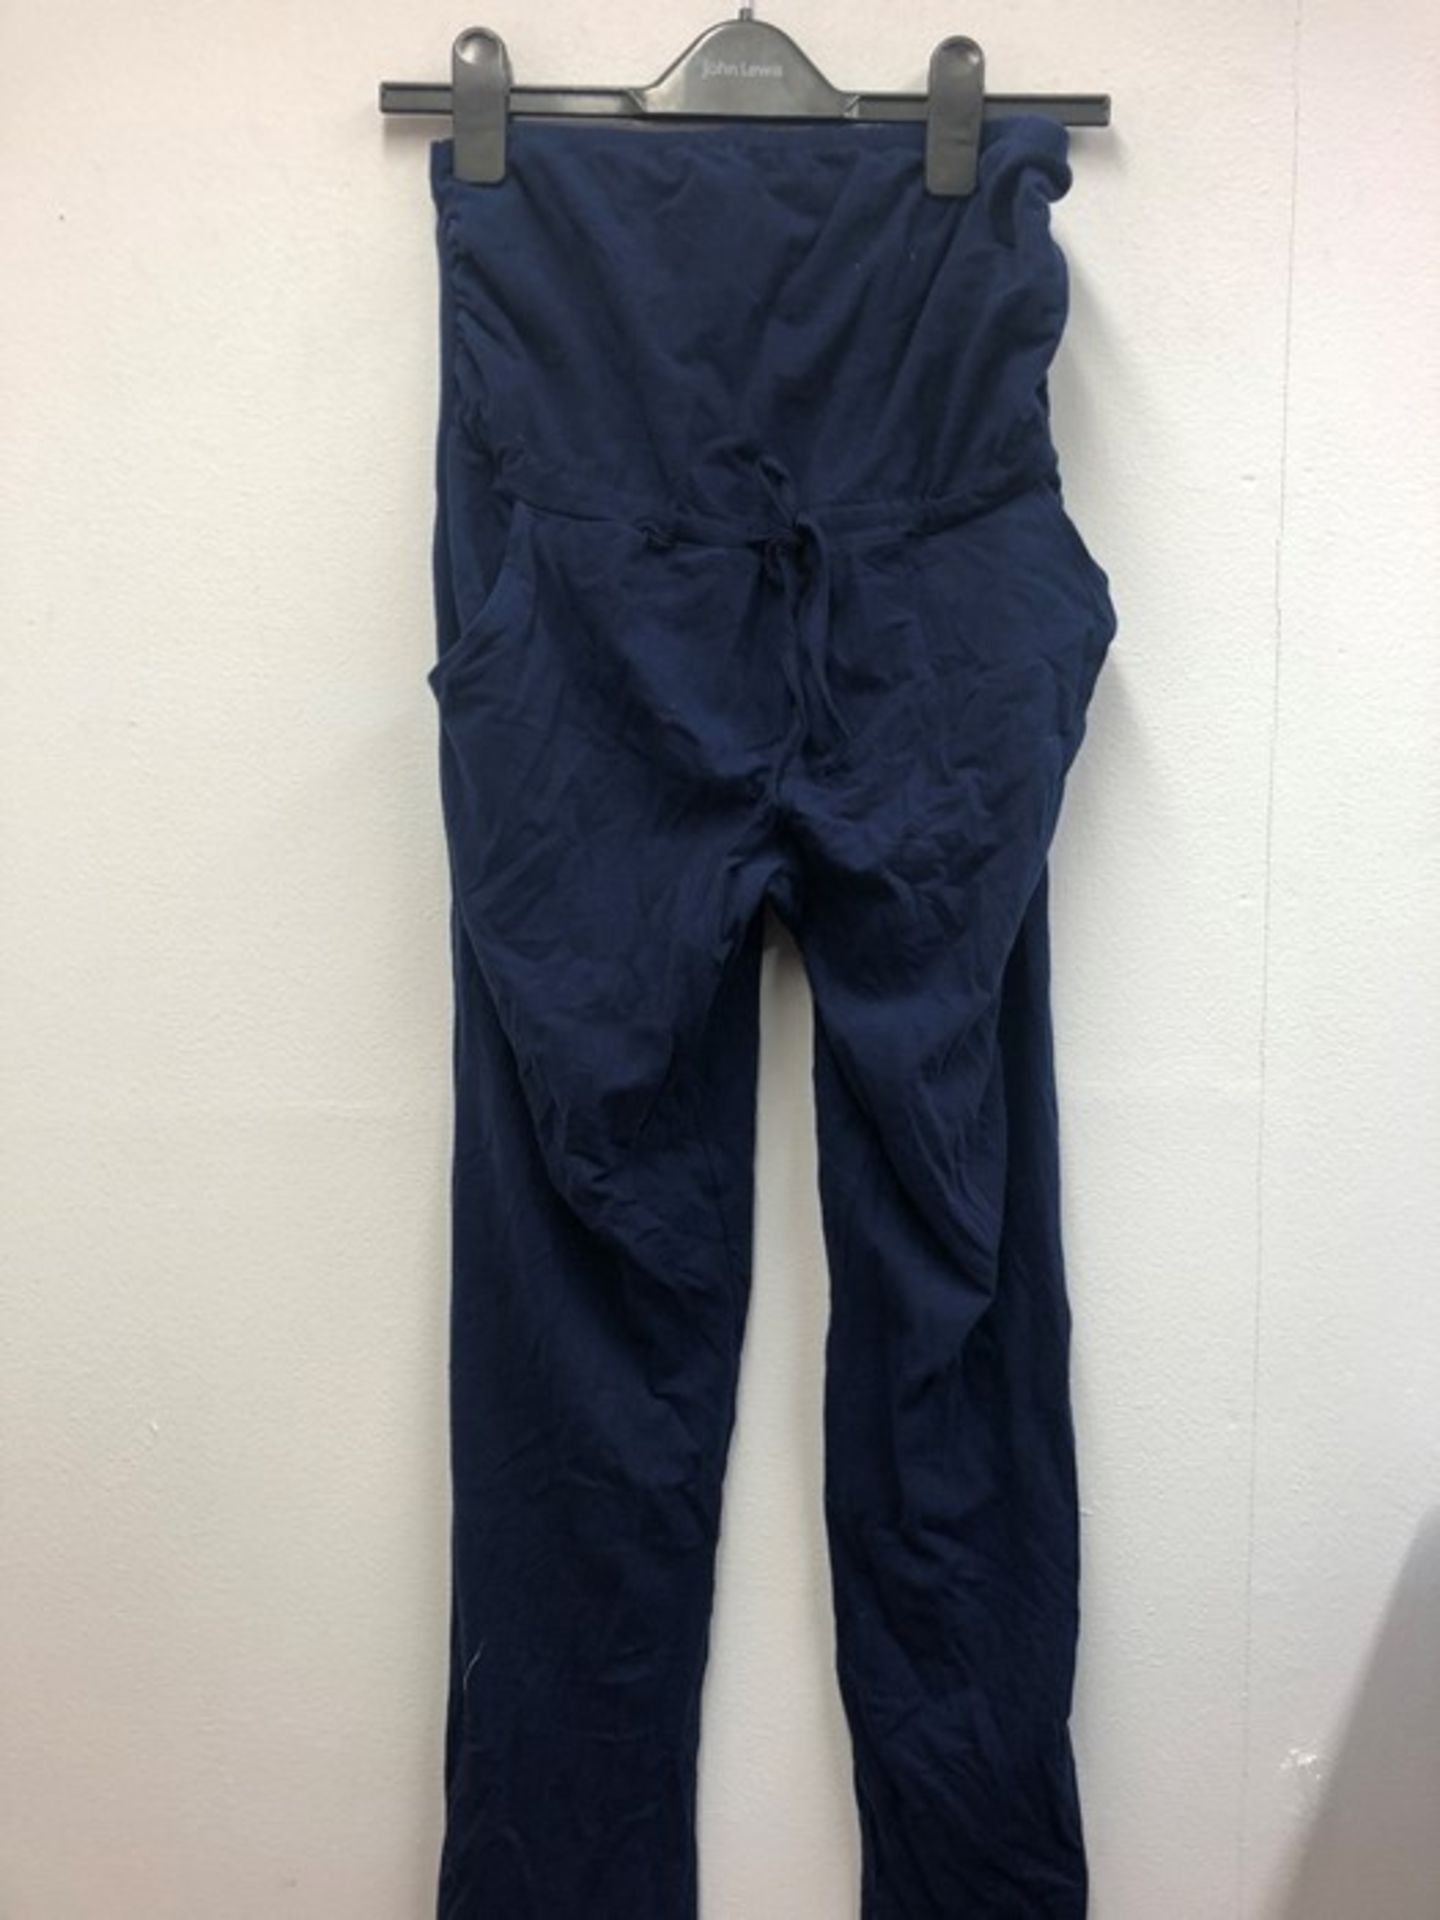 1 AS NEW LA REDOUTE PANTS IN NAVY / SIZE 10/12 (VIEWING HIGHLY RECOMMENDED) - Image 2 of 2